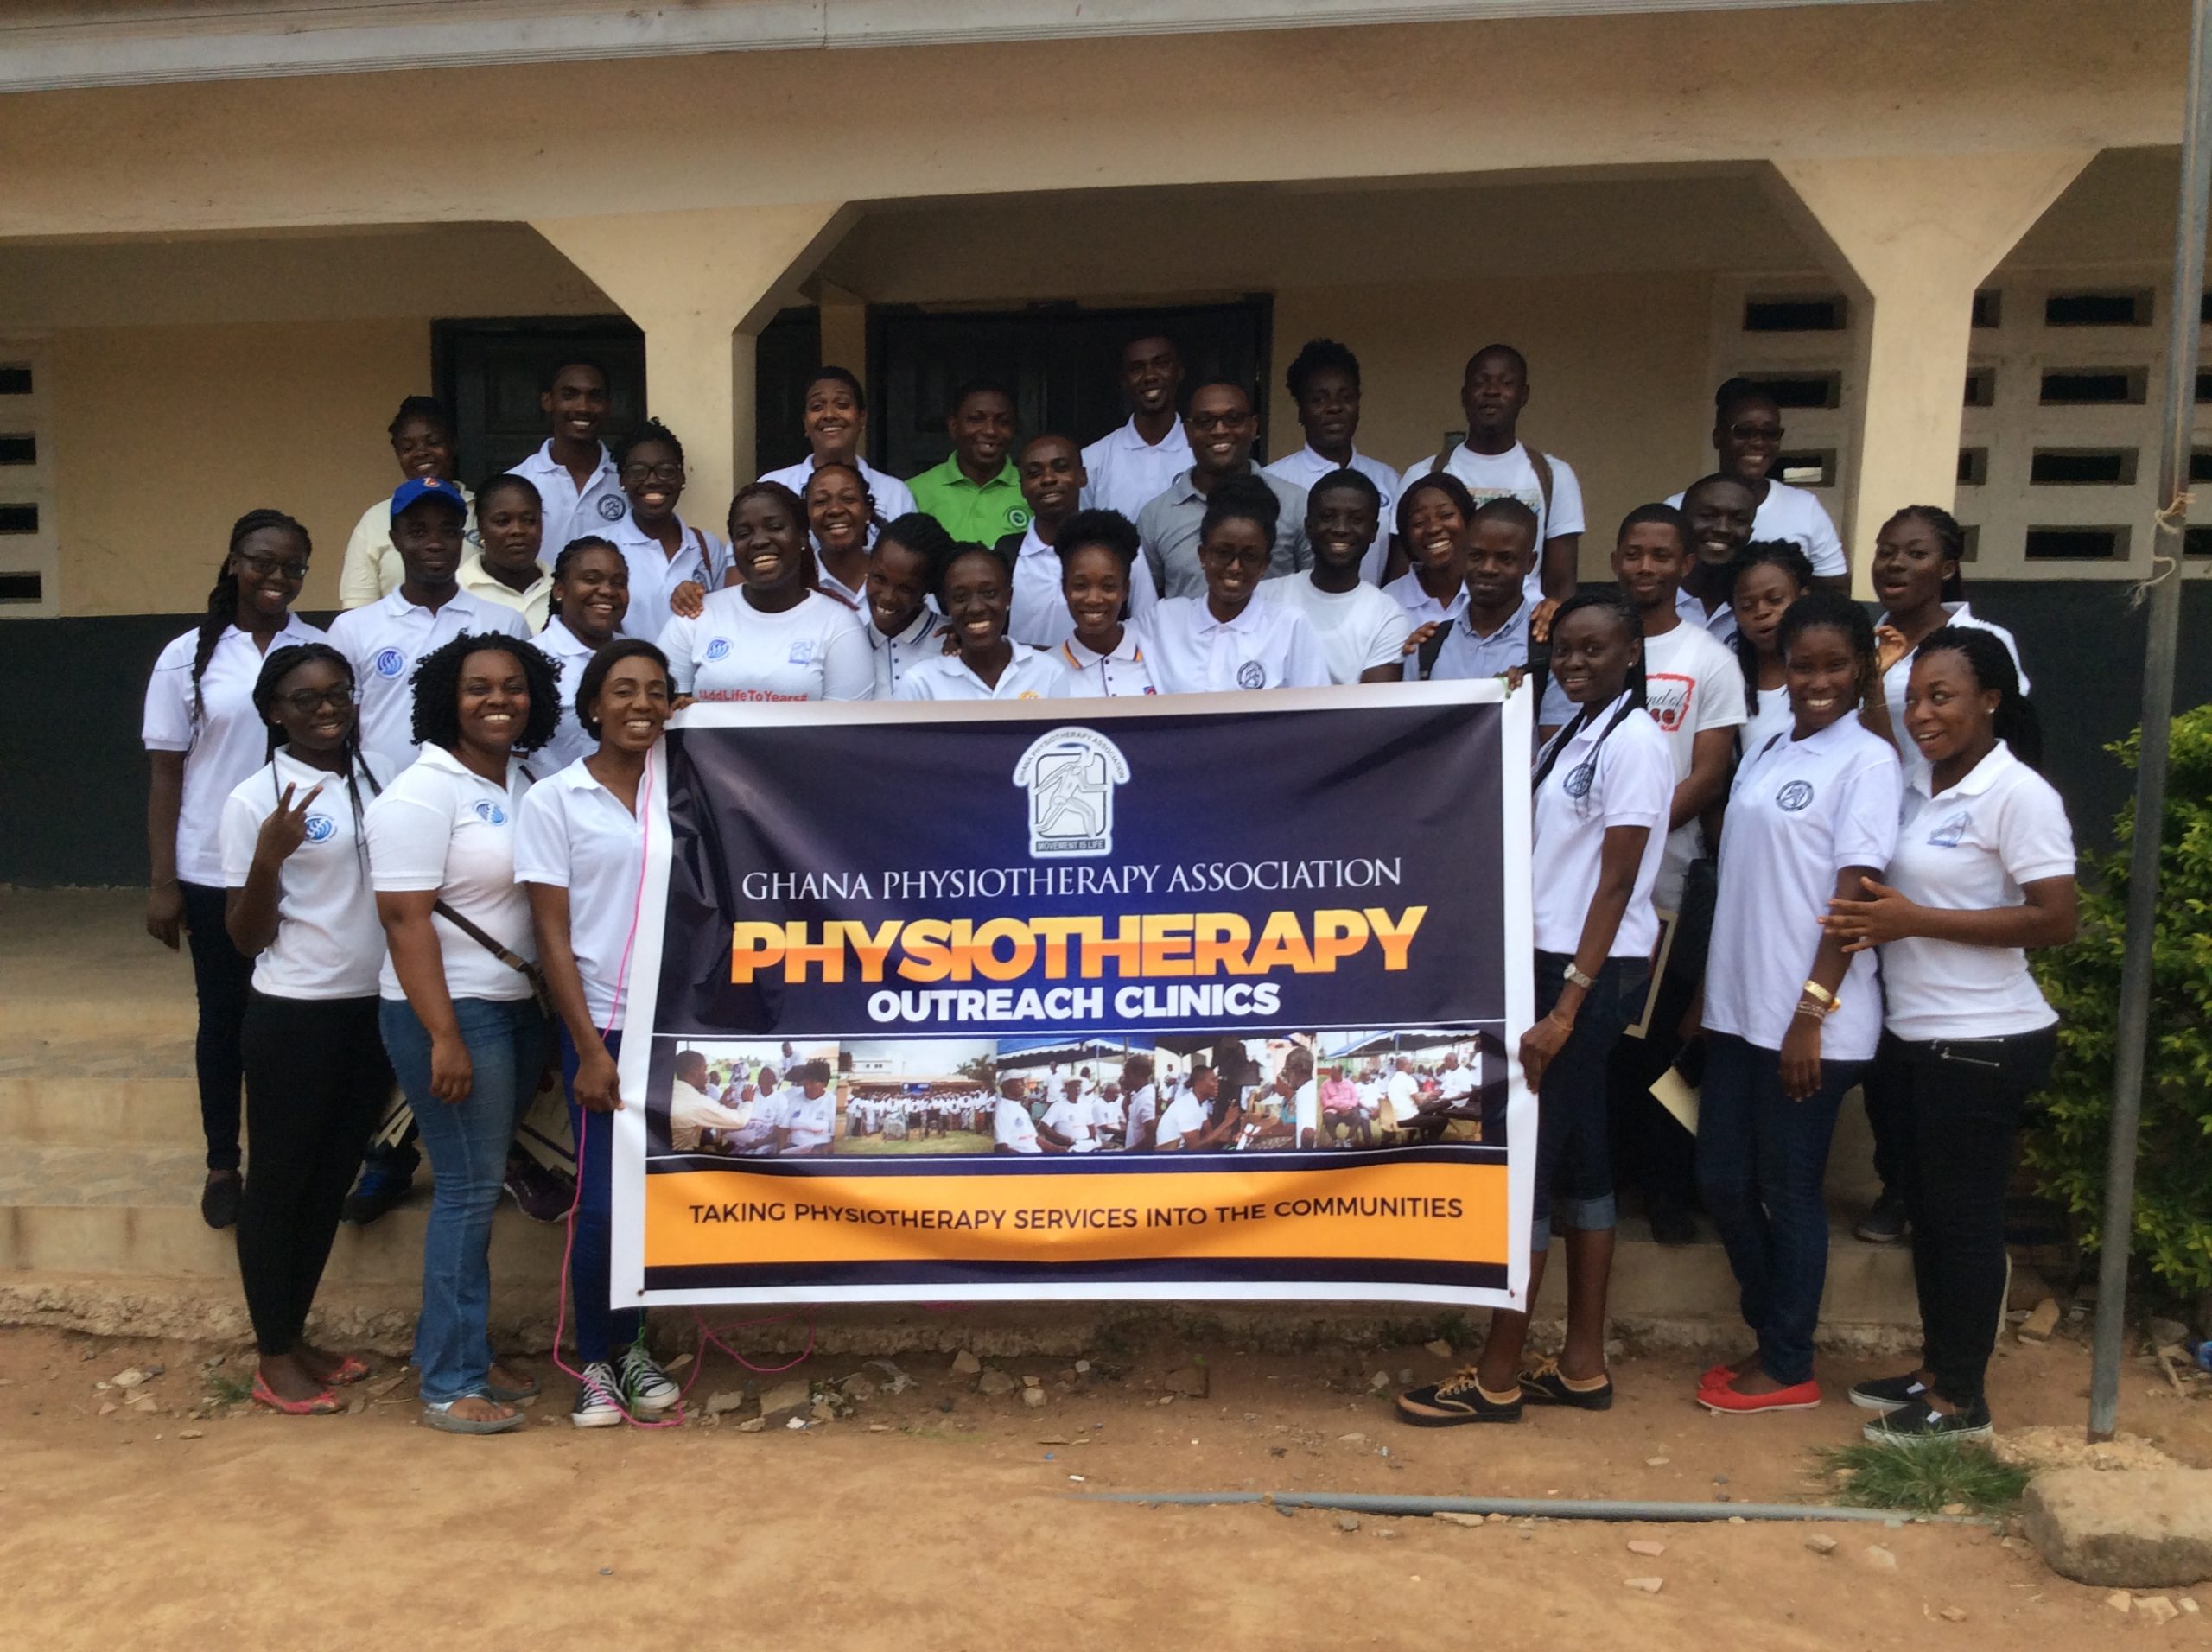 GHANA PHYSIOTHERAPY ASSOCIATION OUTREACH CLINIC HELD AT OTINIBI — 22nd July, 2017